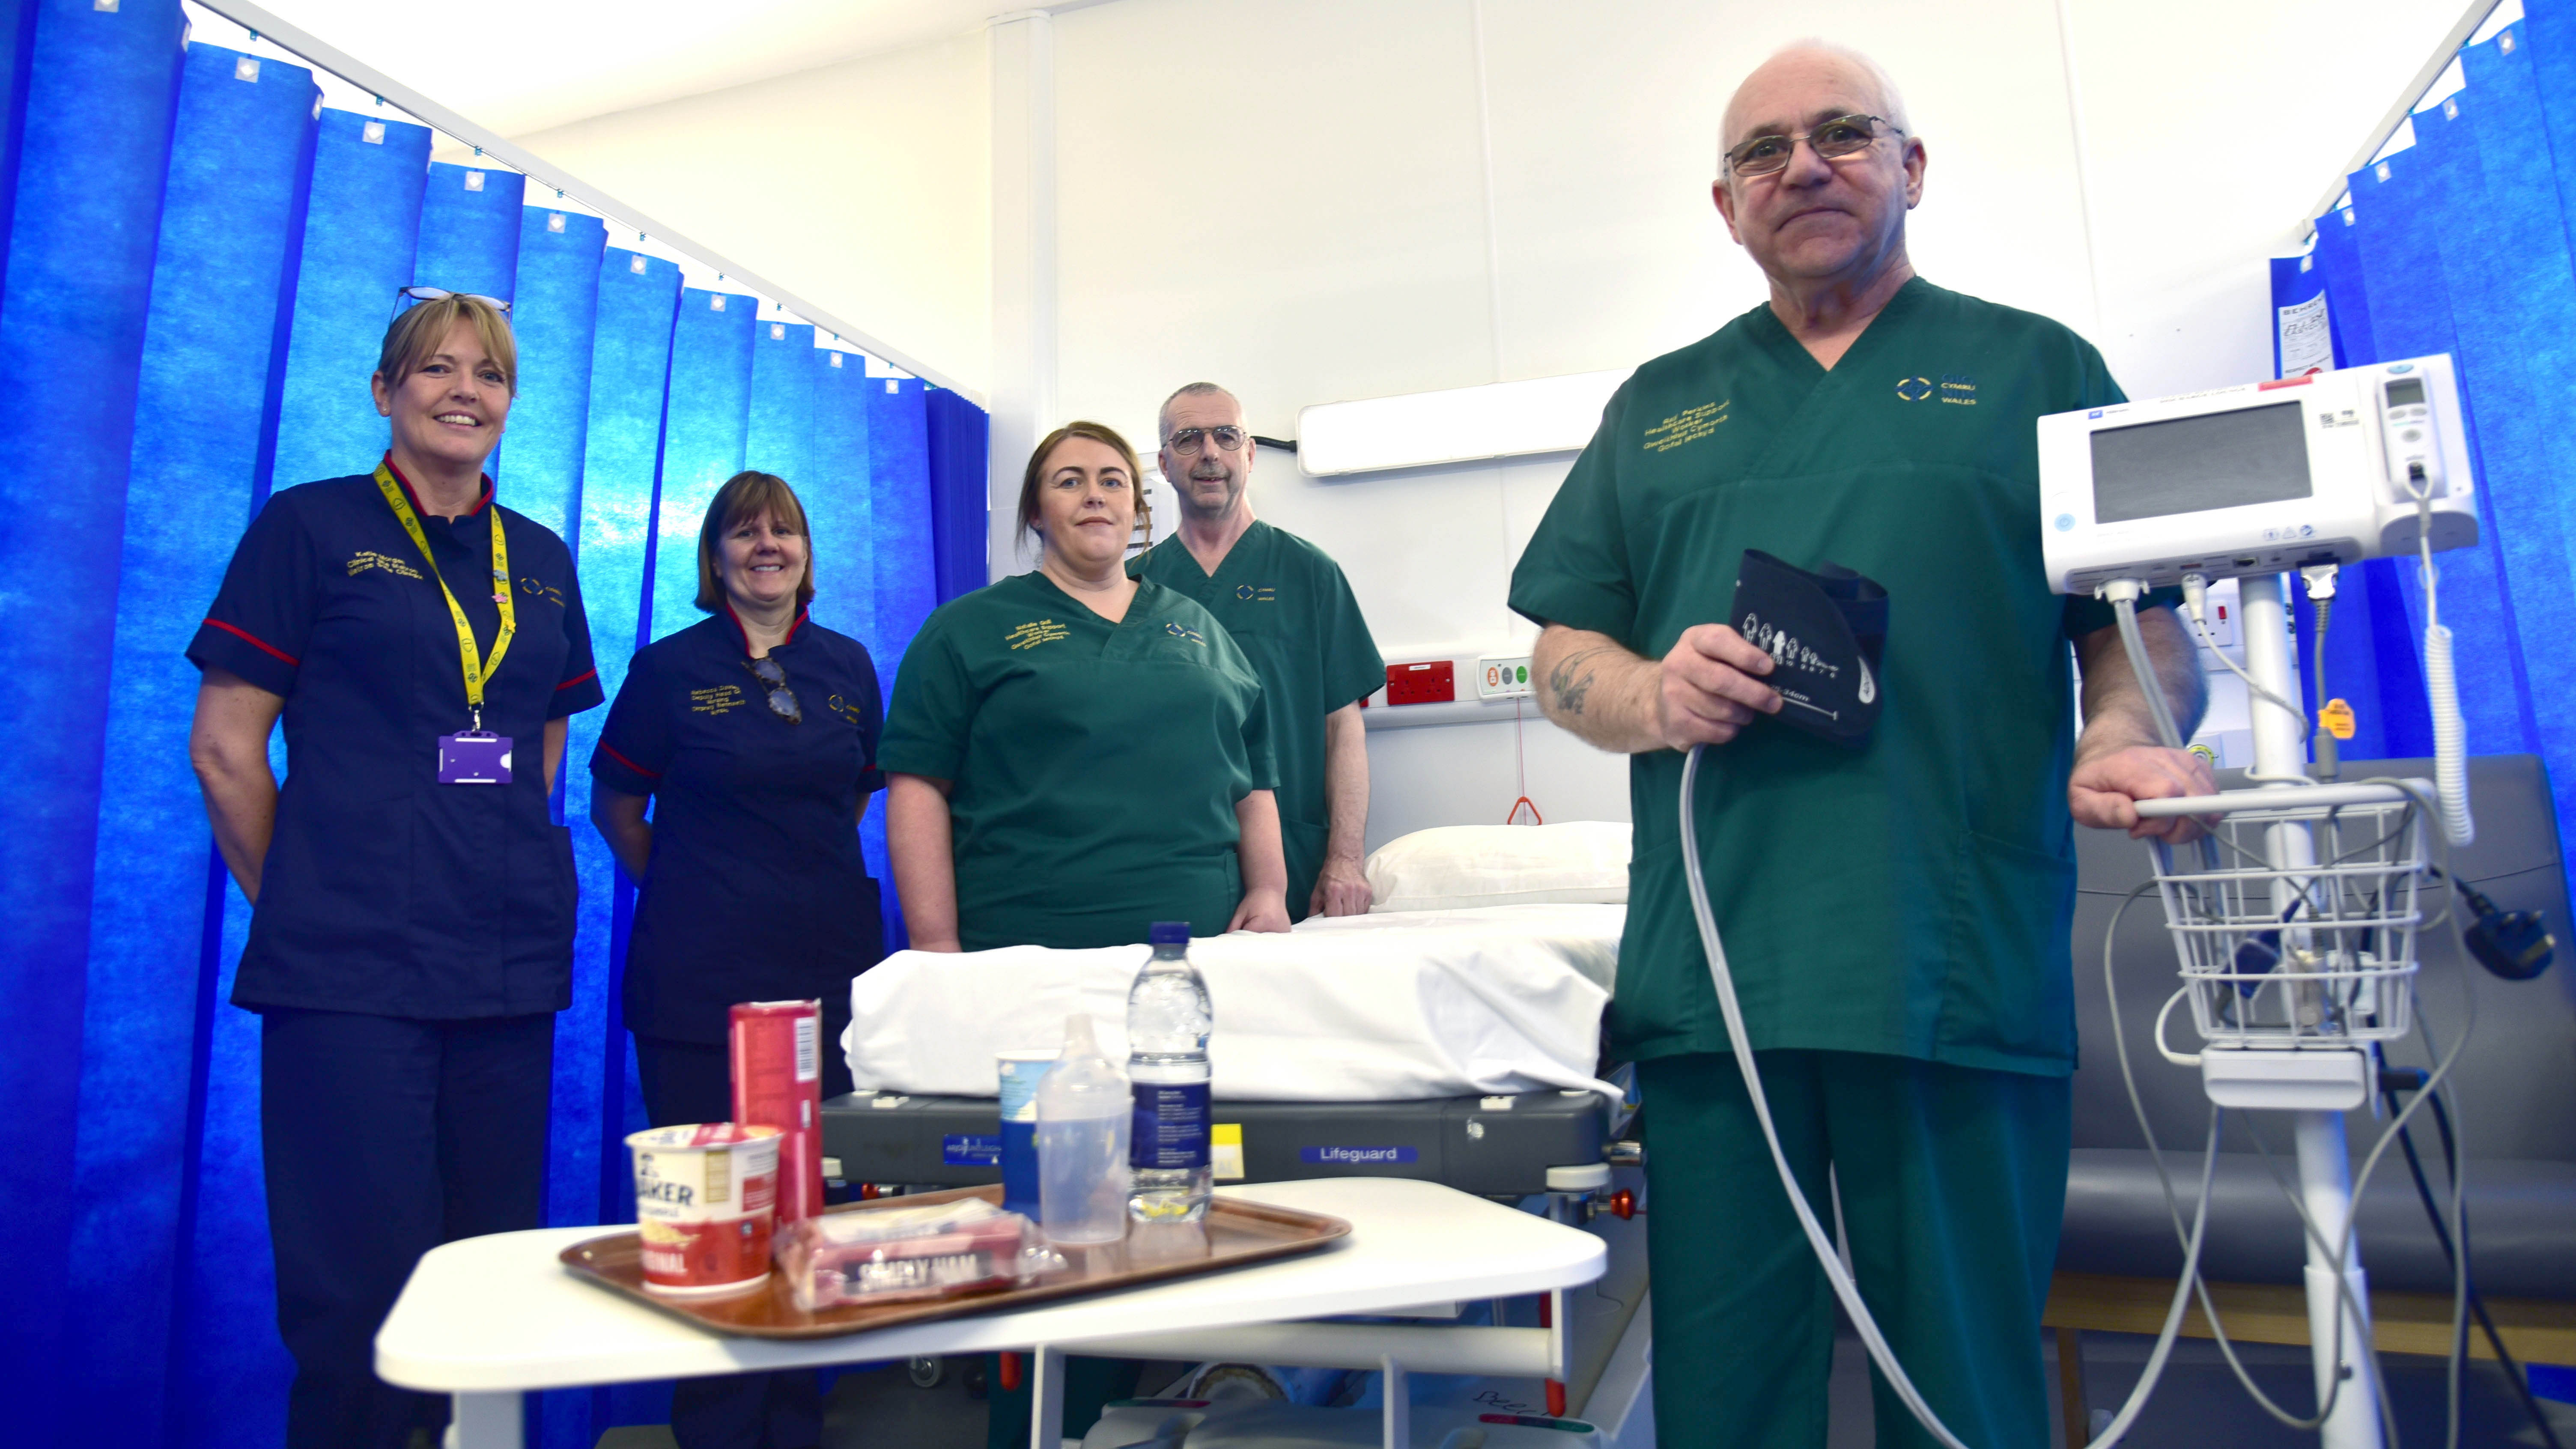 Pictured: (left to right) Katie Morgan, lead clinical site matron, Rebecca Davies, senior matron Emergency Care and Hospital Operations, Natalie Gull, Jerry Hughes and Ray Perkins, healthcare support workers.